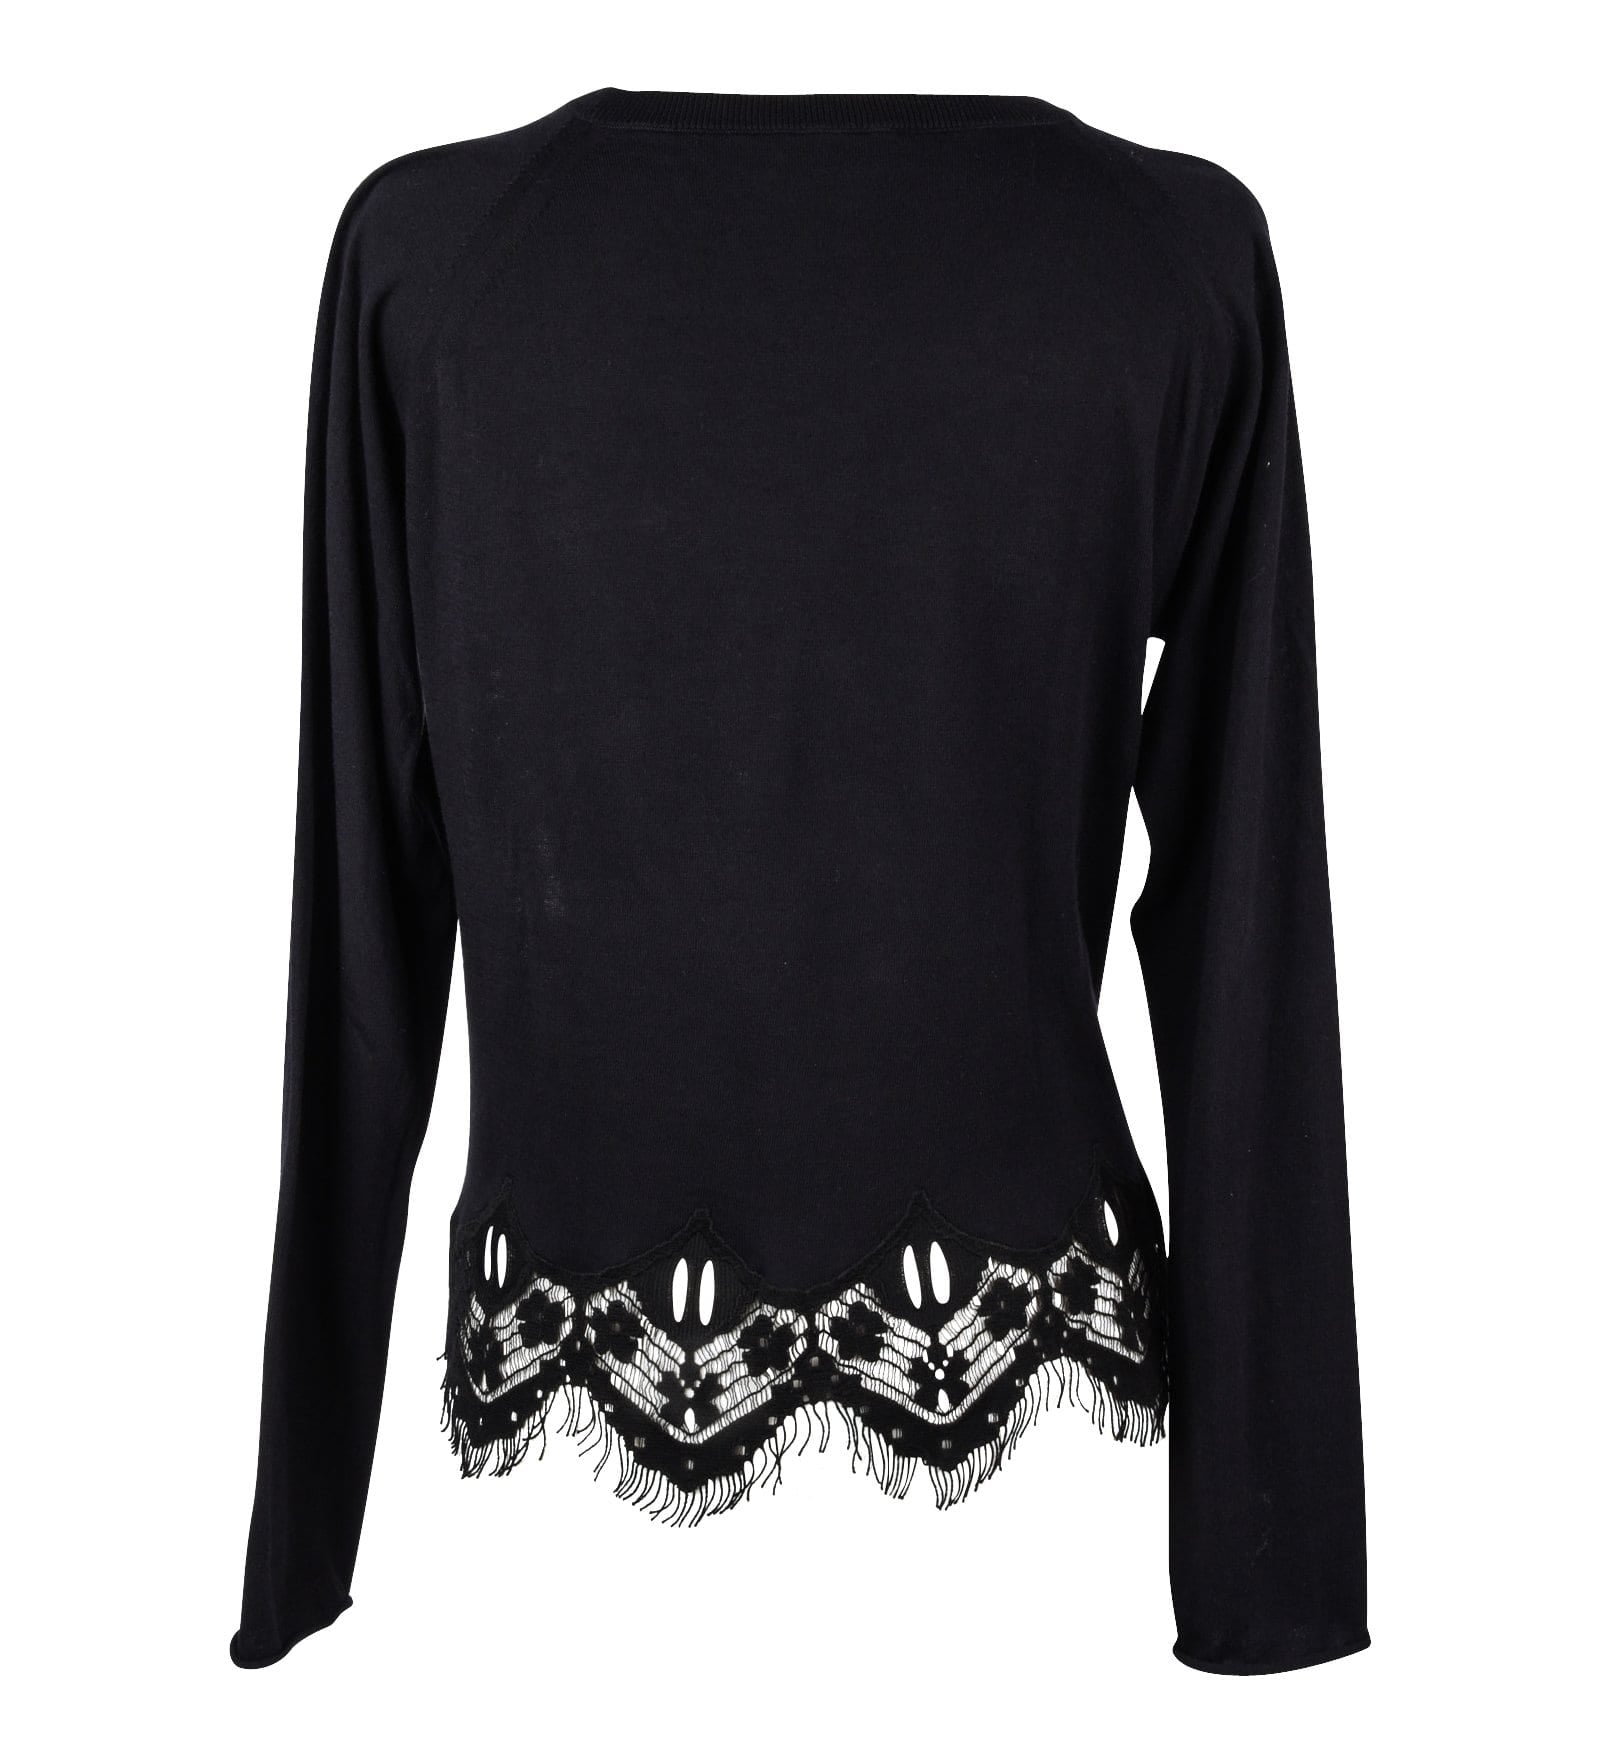 Chloe Top Navy Beautiful Black Lace Insets S - mightychic